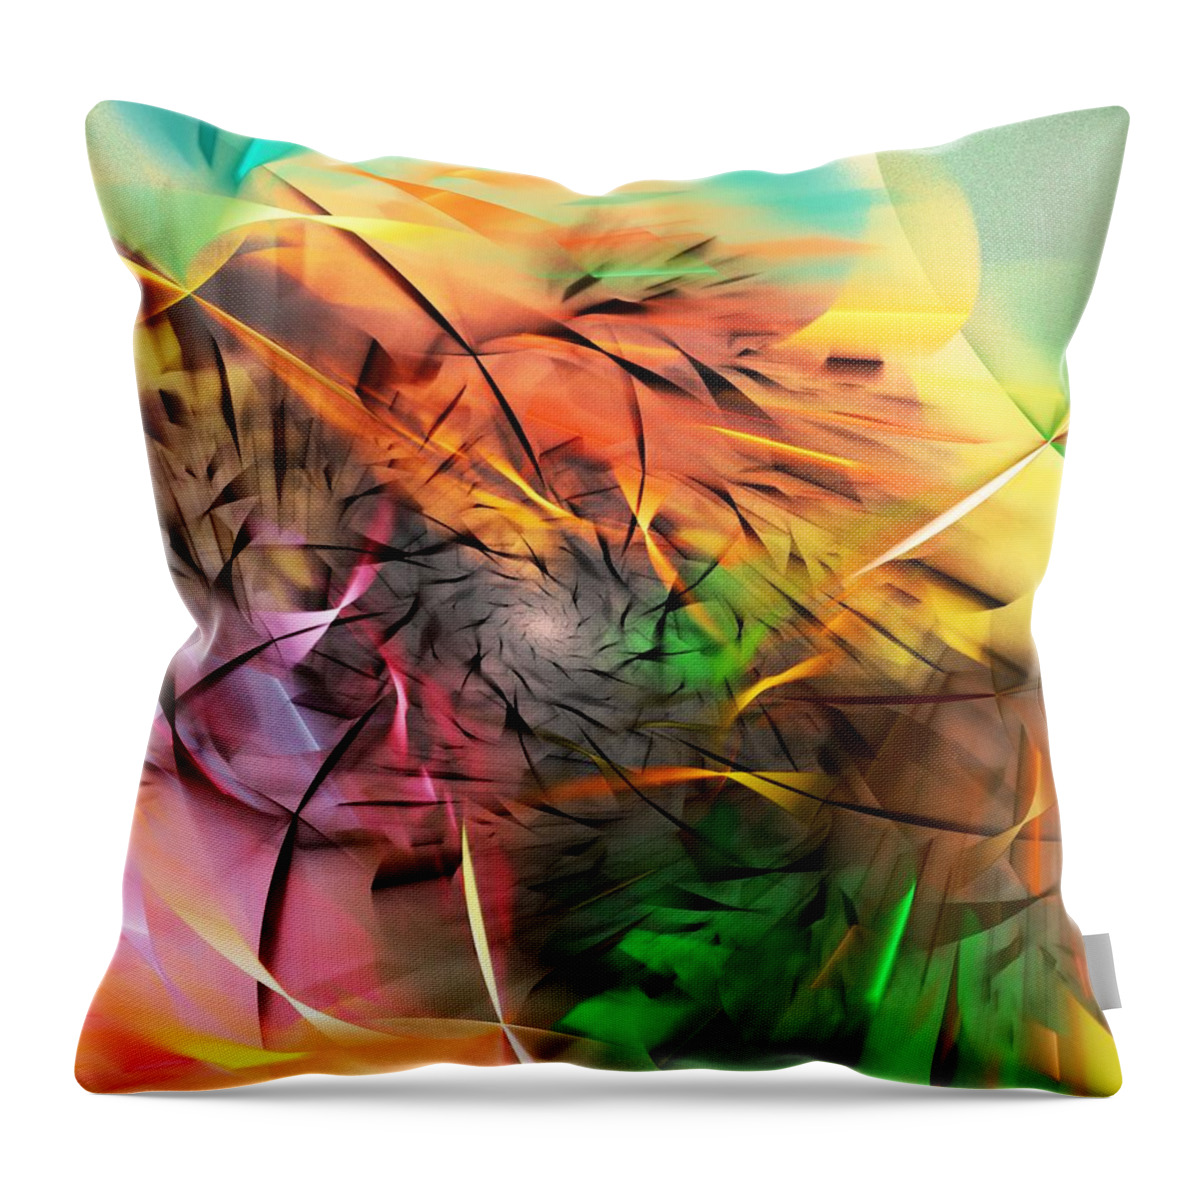 Digital Painting Throw Pillow featuring the digital art From Both Sides Now by David Lane